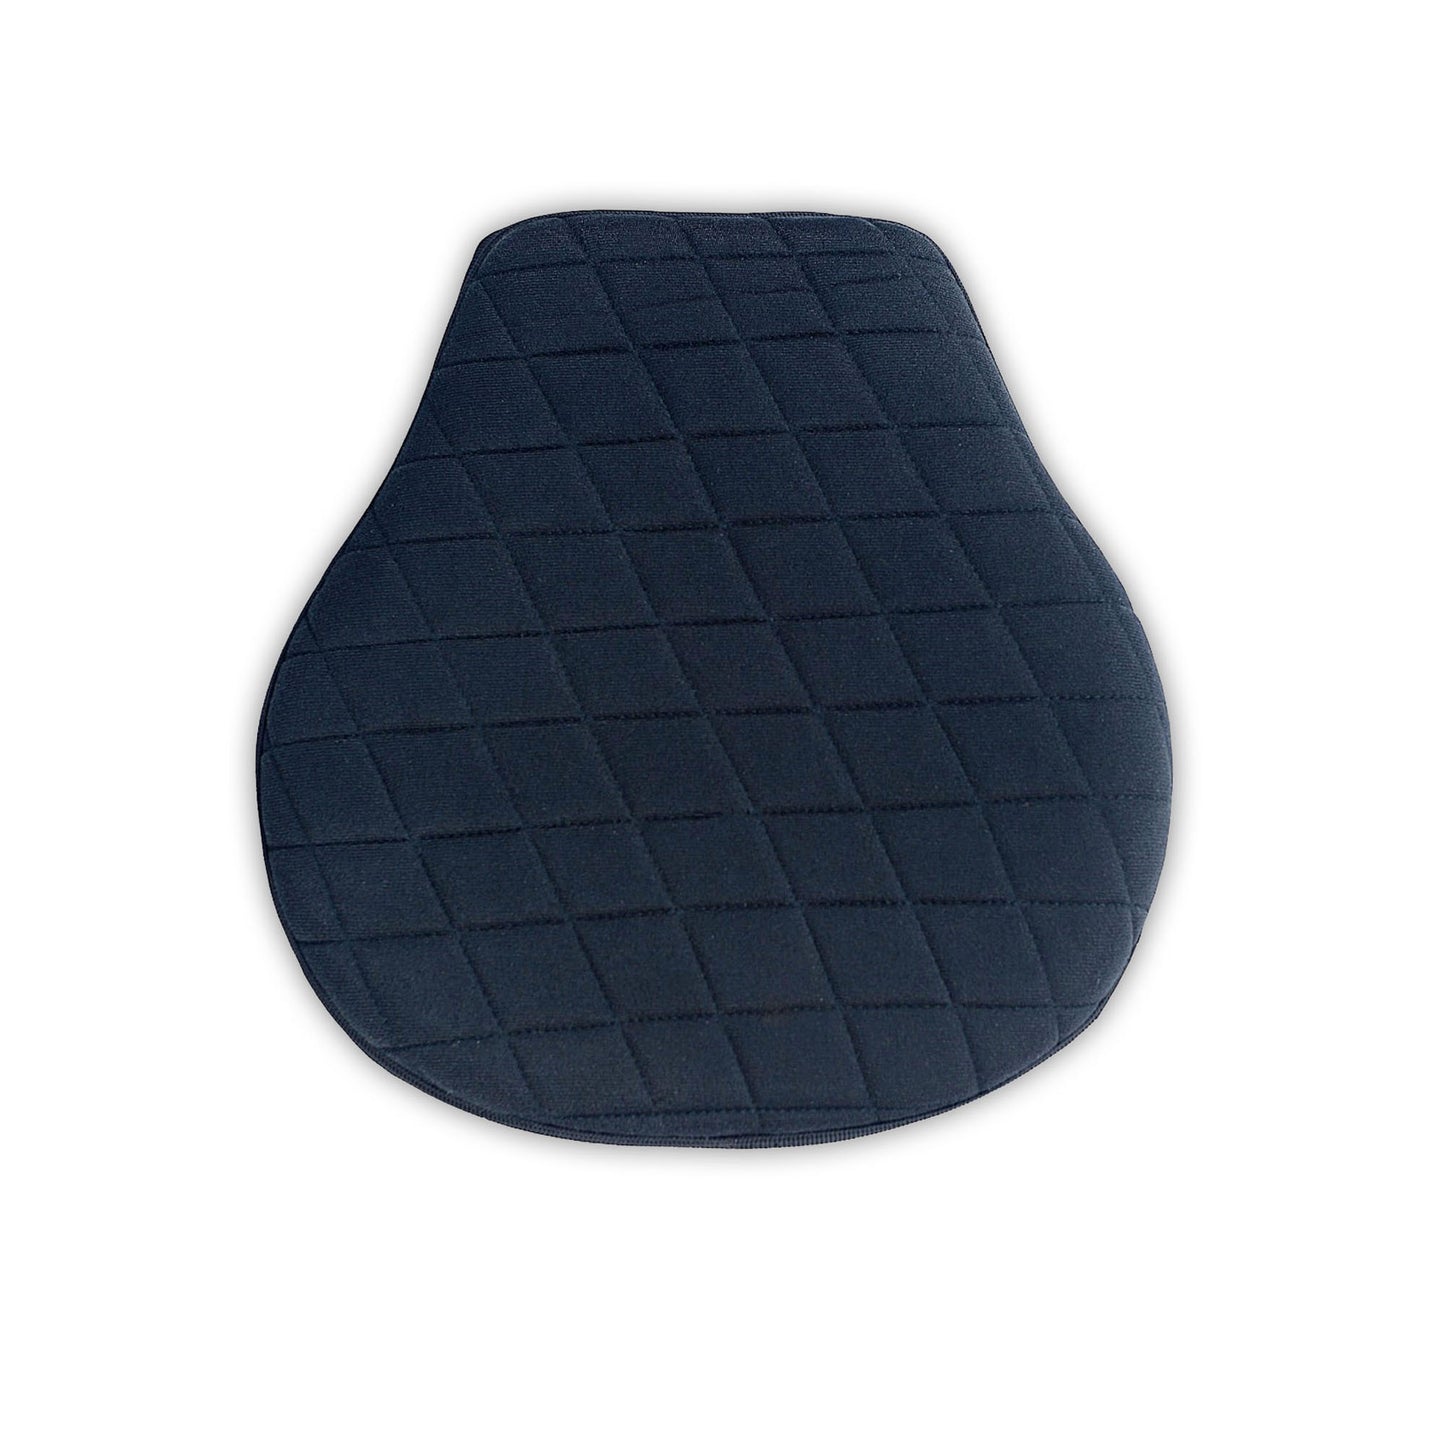 Motorcycle Driver Gel Seat Pad Cushion with Memory Foam for Comfortable Travel